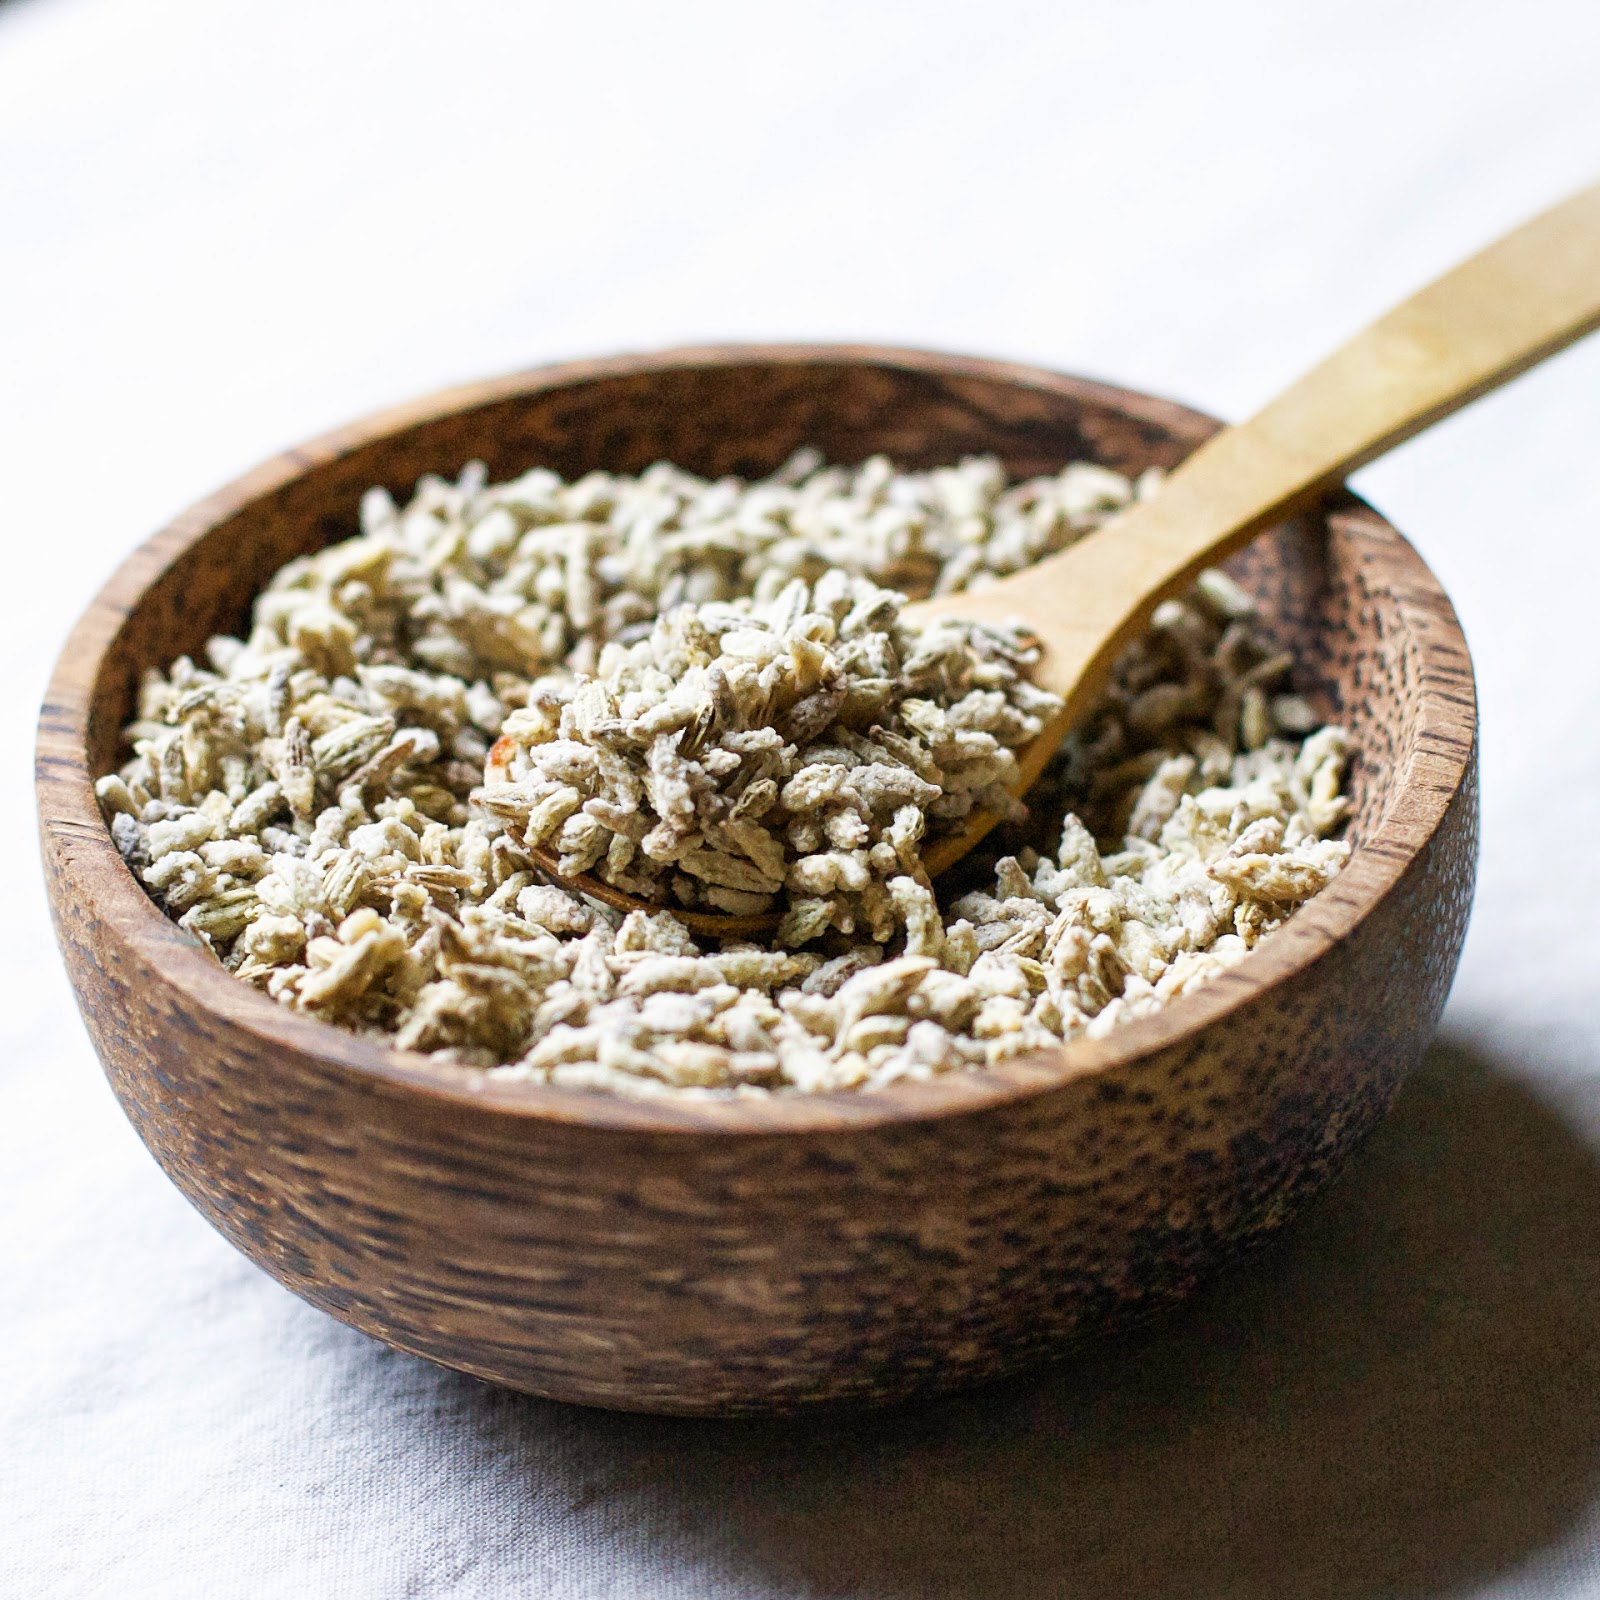 fennel, seeds, digestive support, health, breath